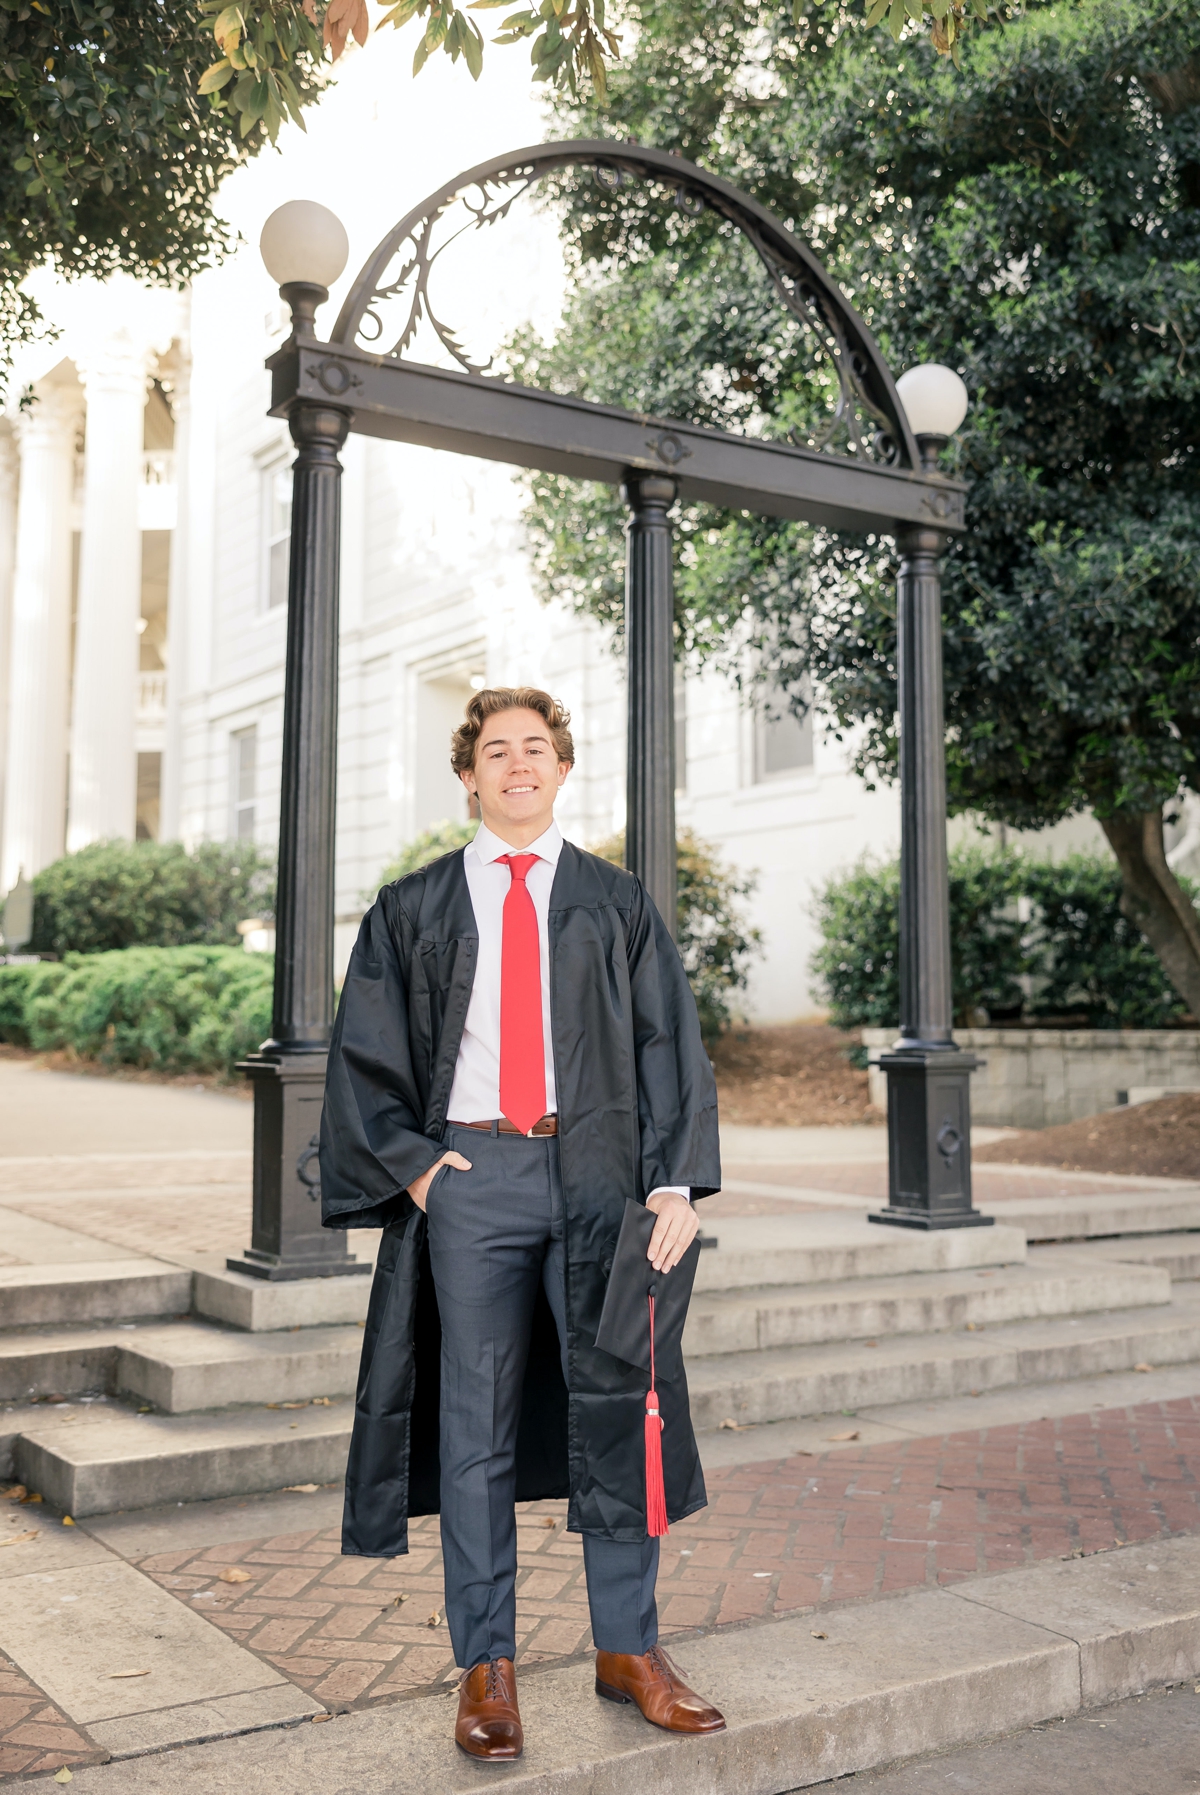 UGa graduate standing smiling in front of the entrance to campus wearing his black graduation robe and holding his cap in one hand during his graduation photo session